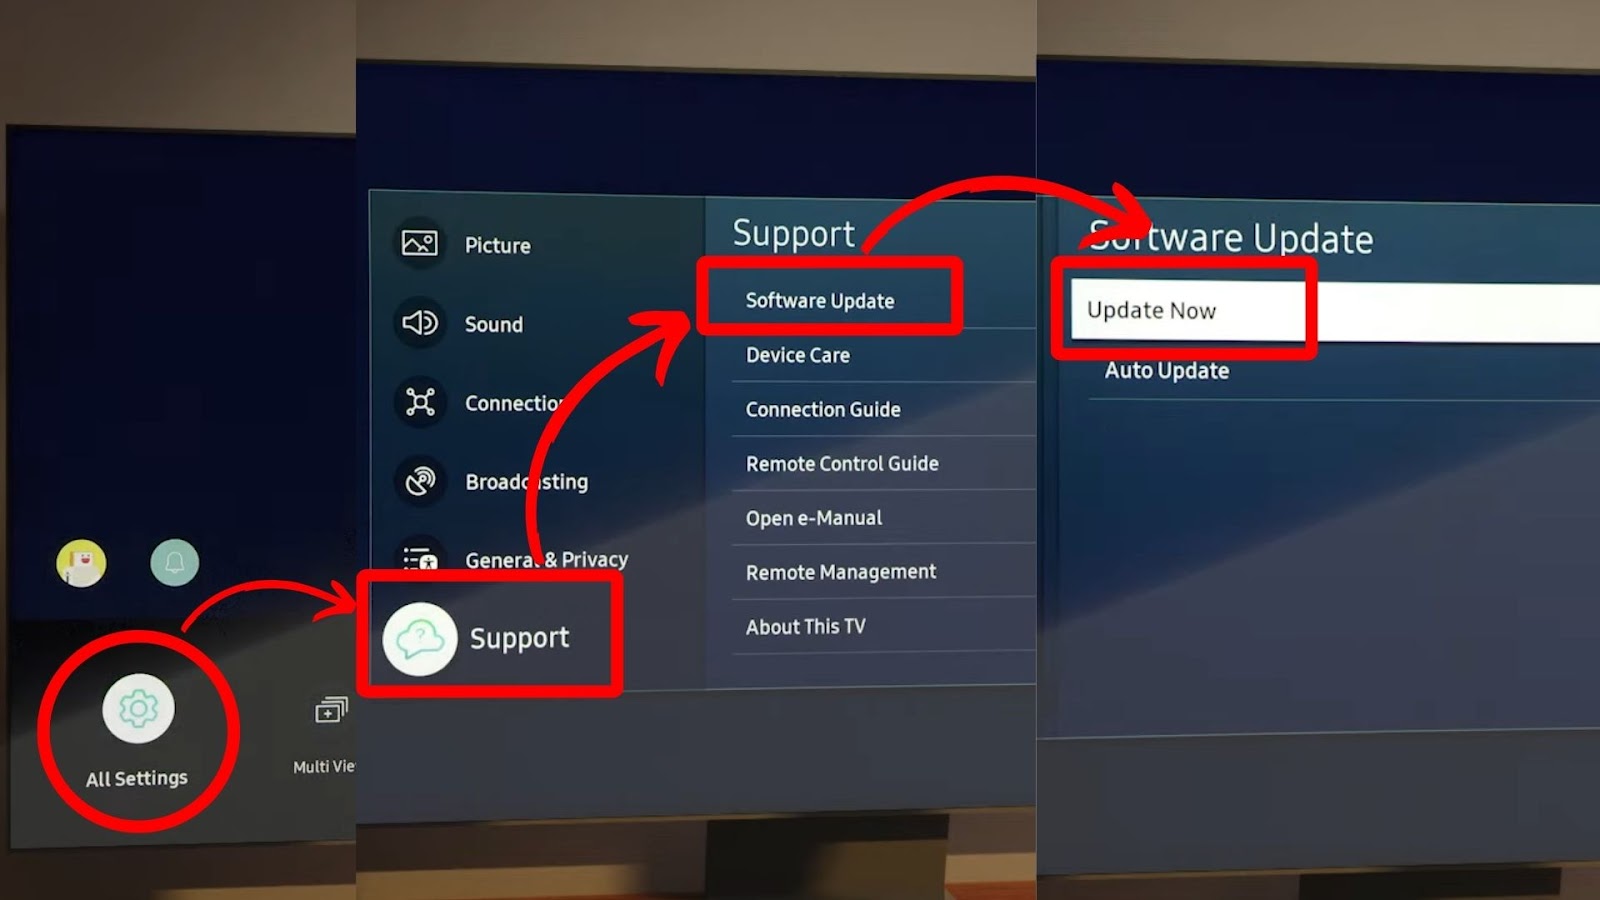 How to Conduct a Software Update on Samsung TV